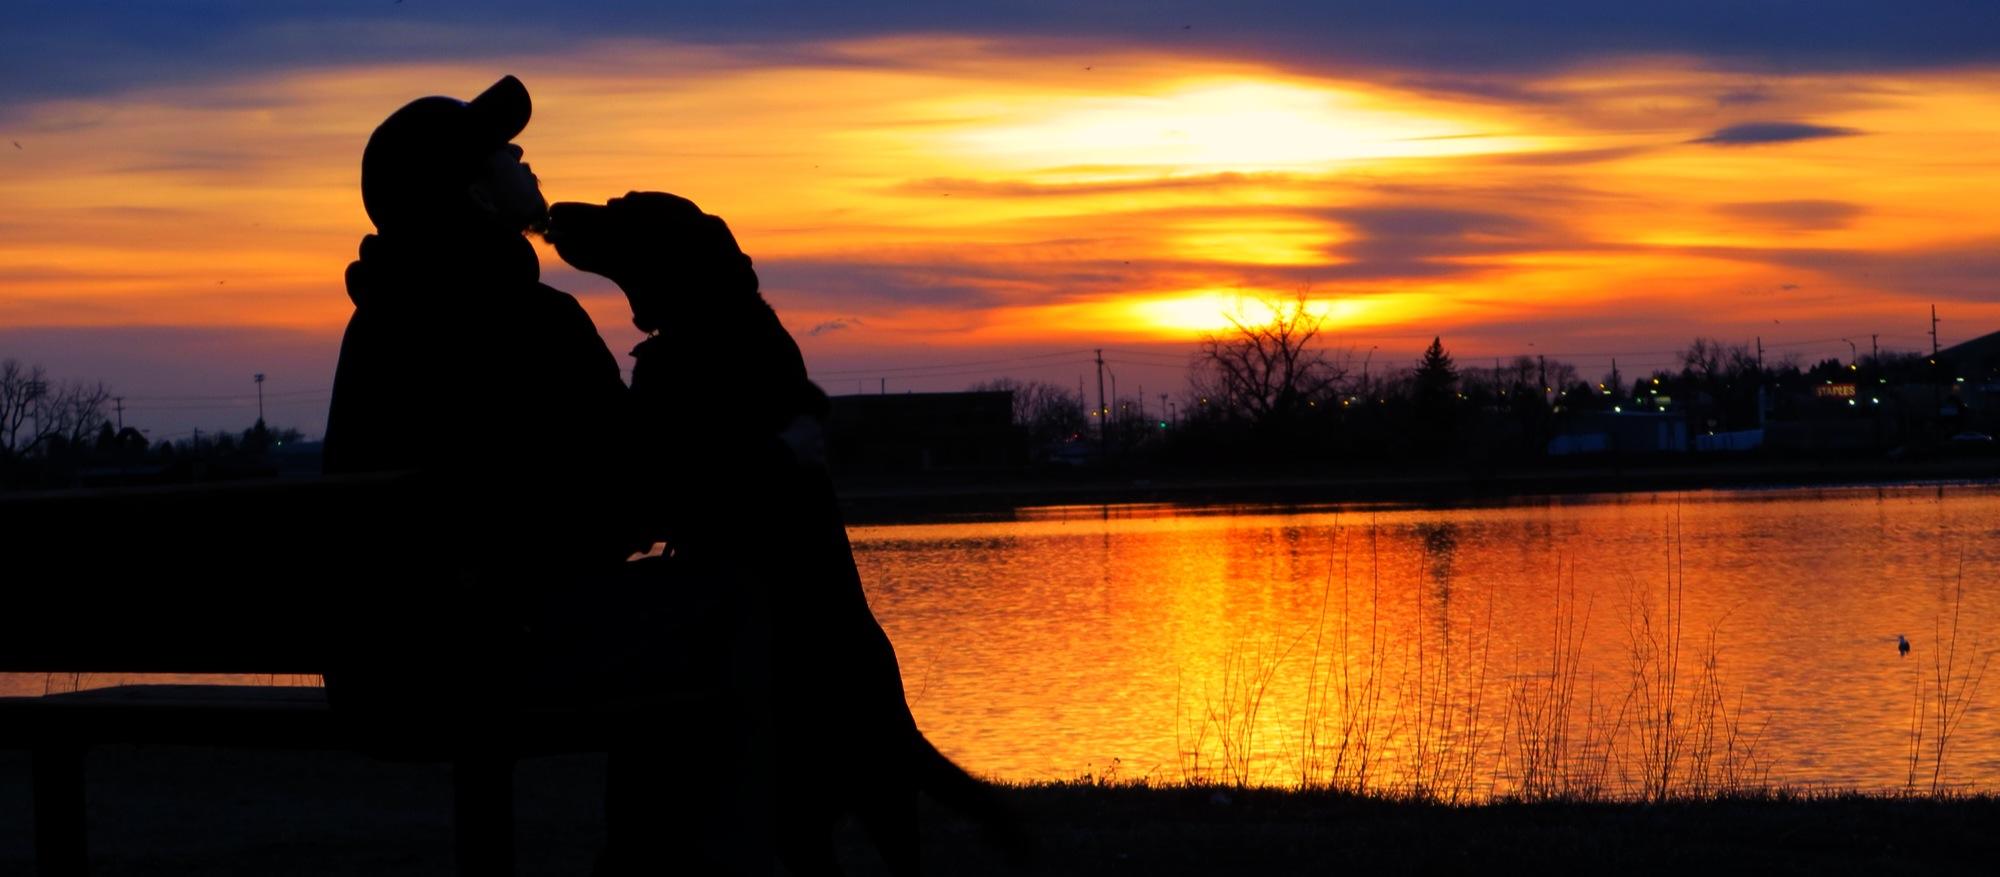 Ed and his dog Hallie at sunset